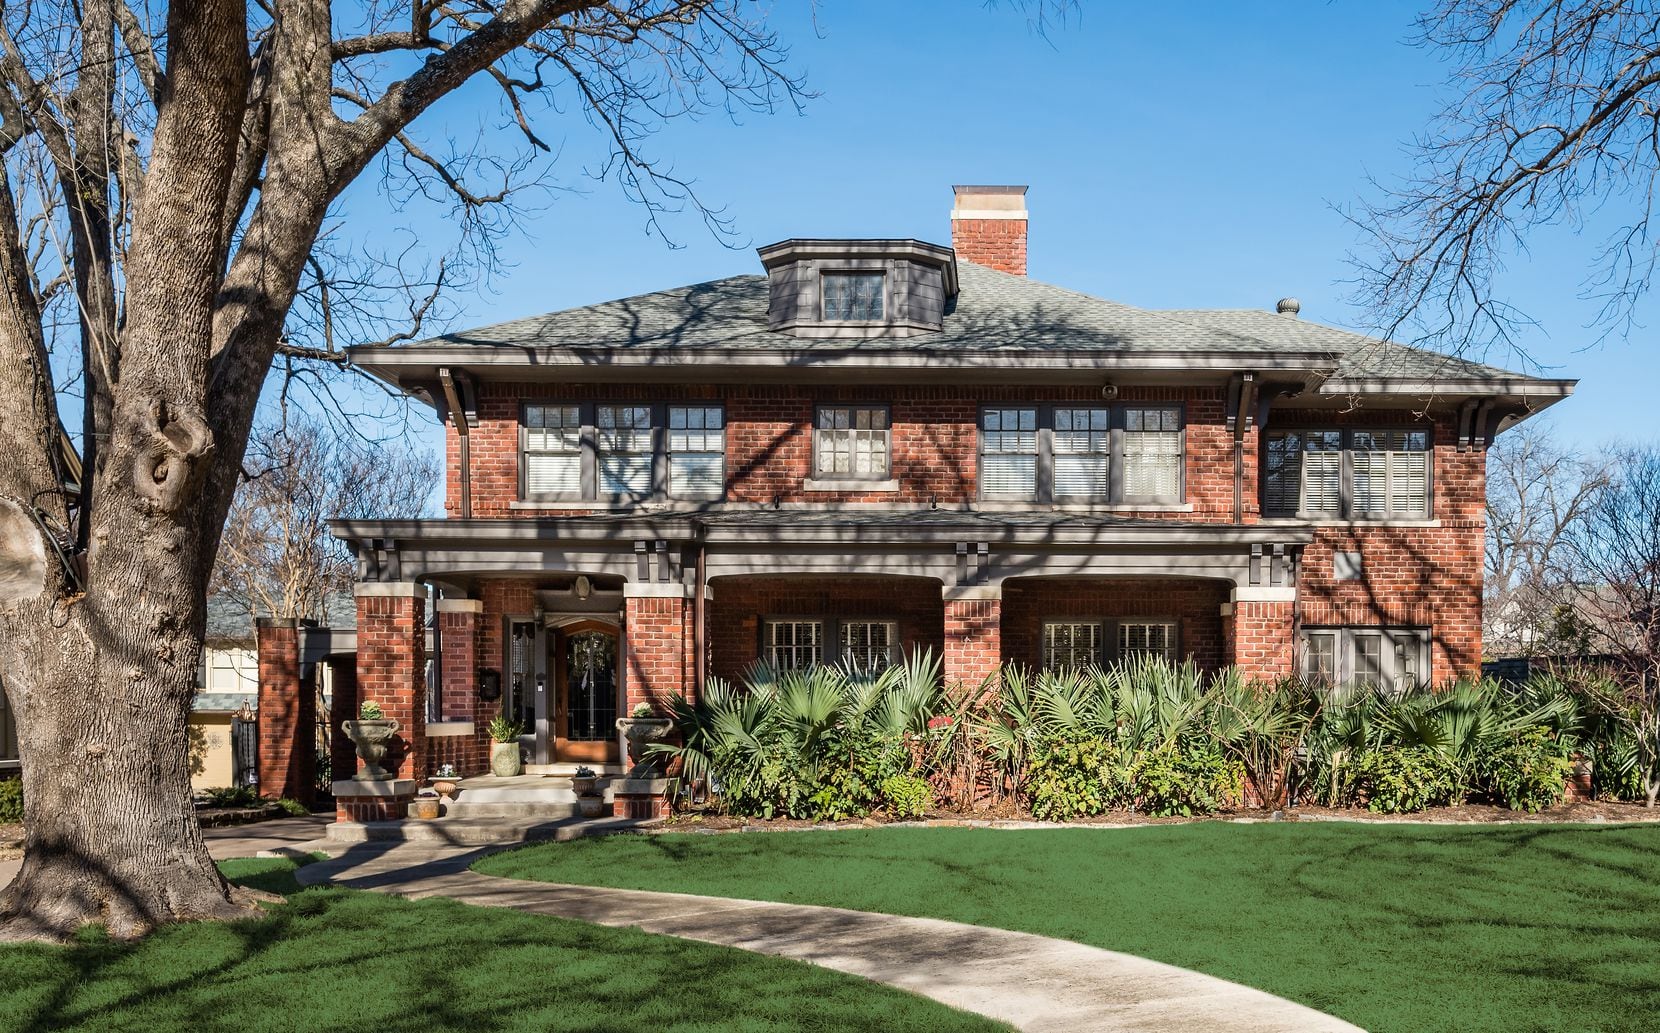 A 100-year old home on Swiss Avenue is featured on the home tour.